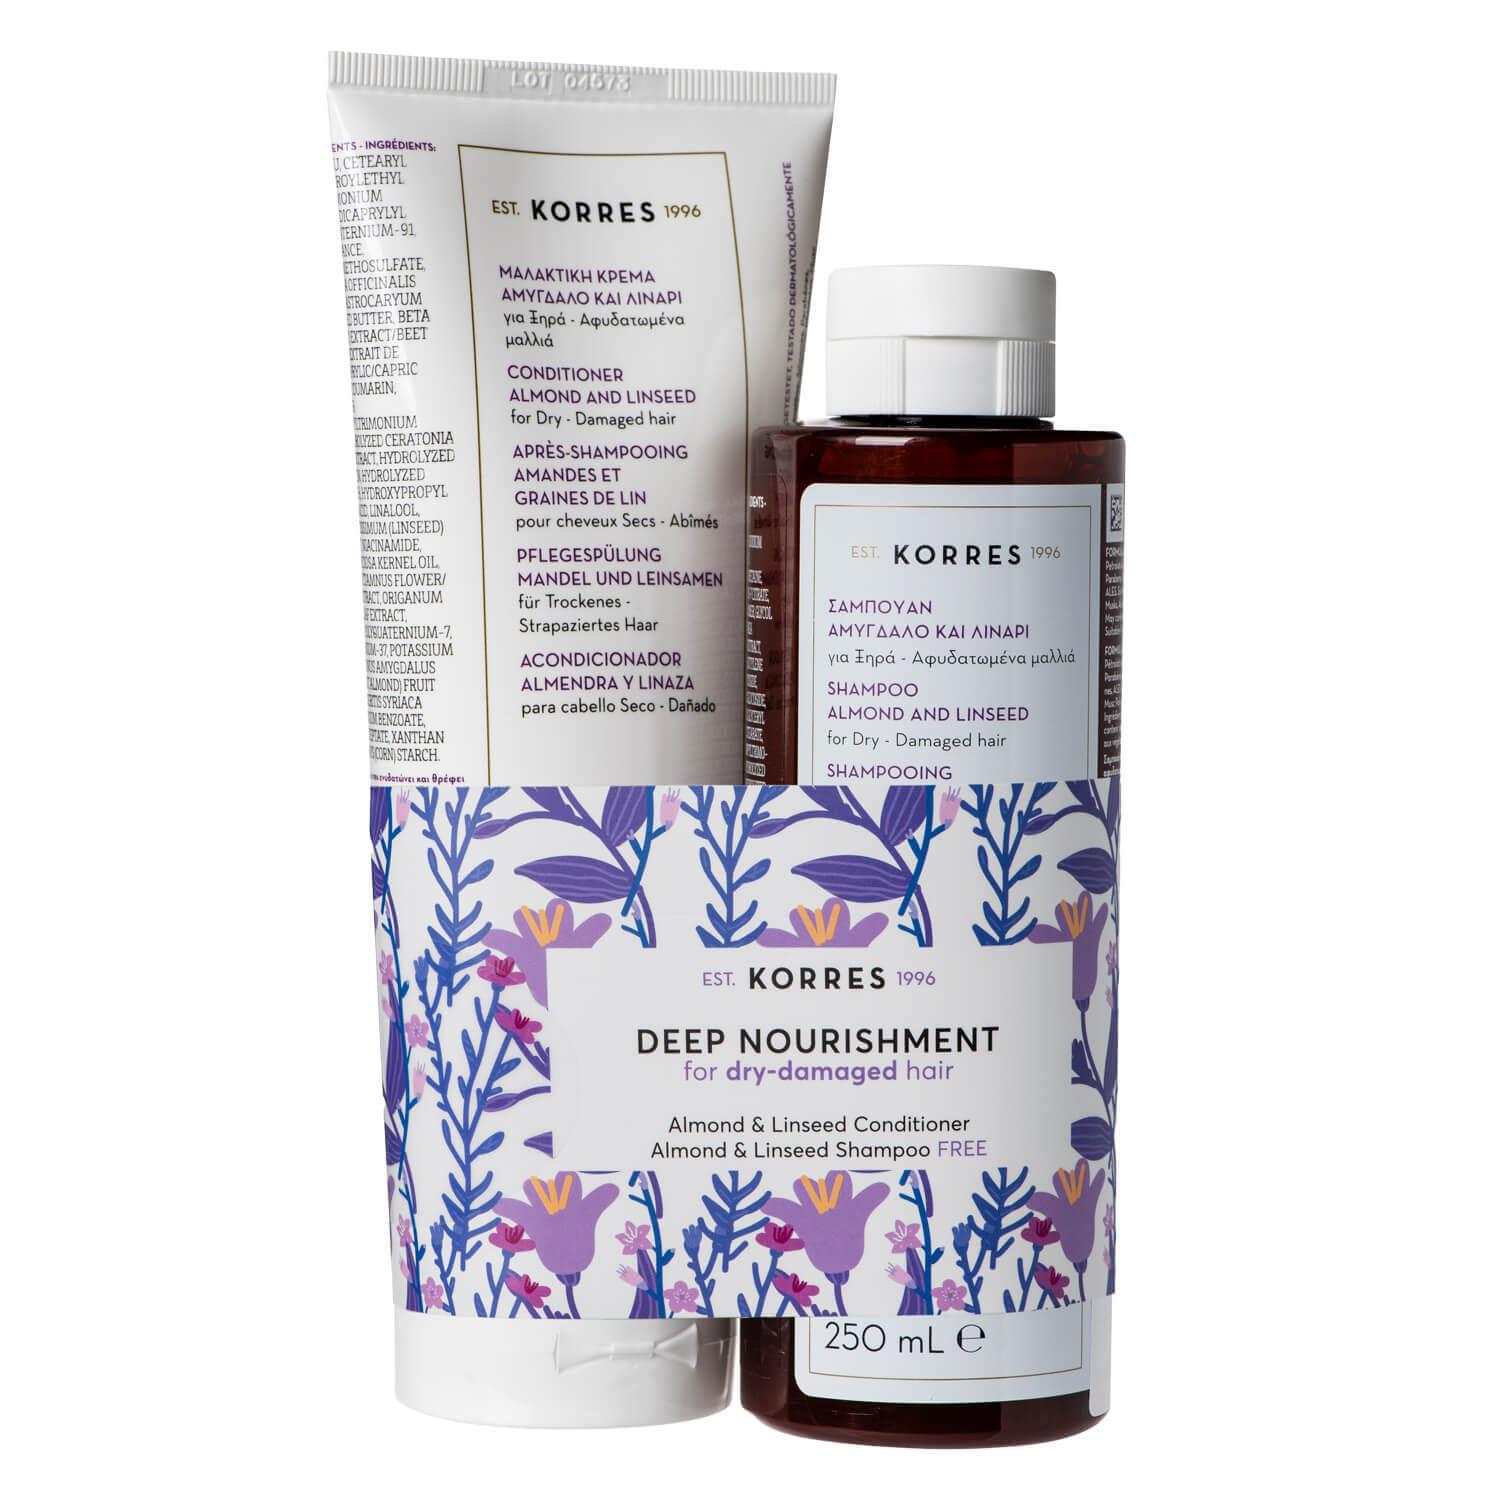 Korres Haircare - Almond & Linseed Kit de soins capillaires